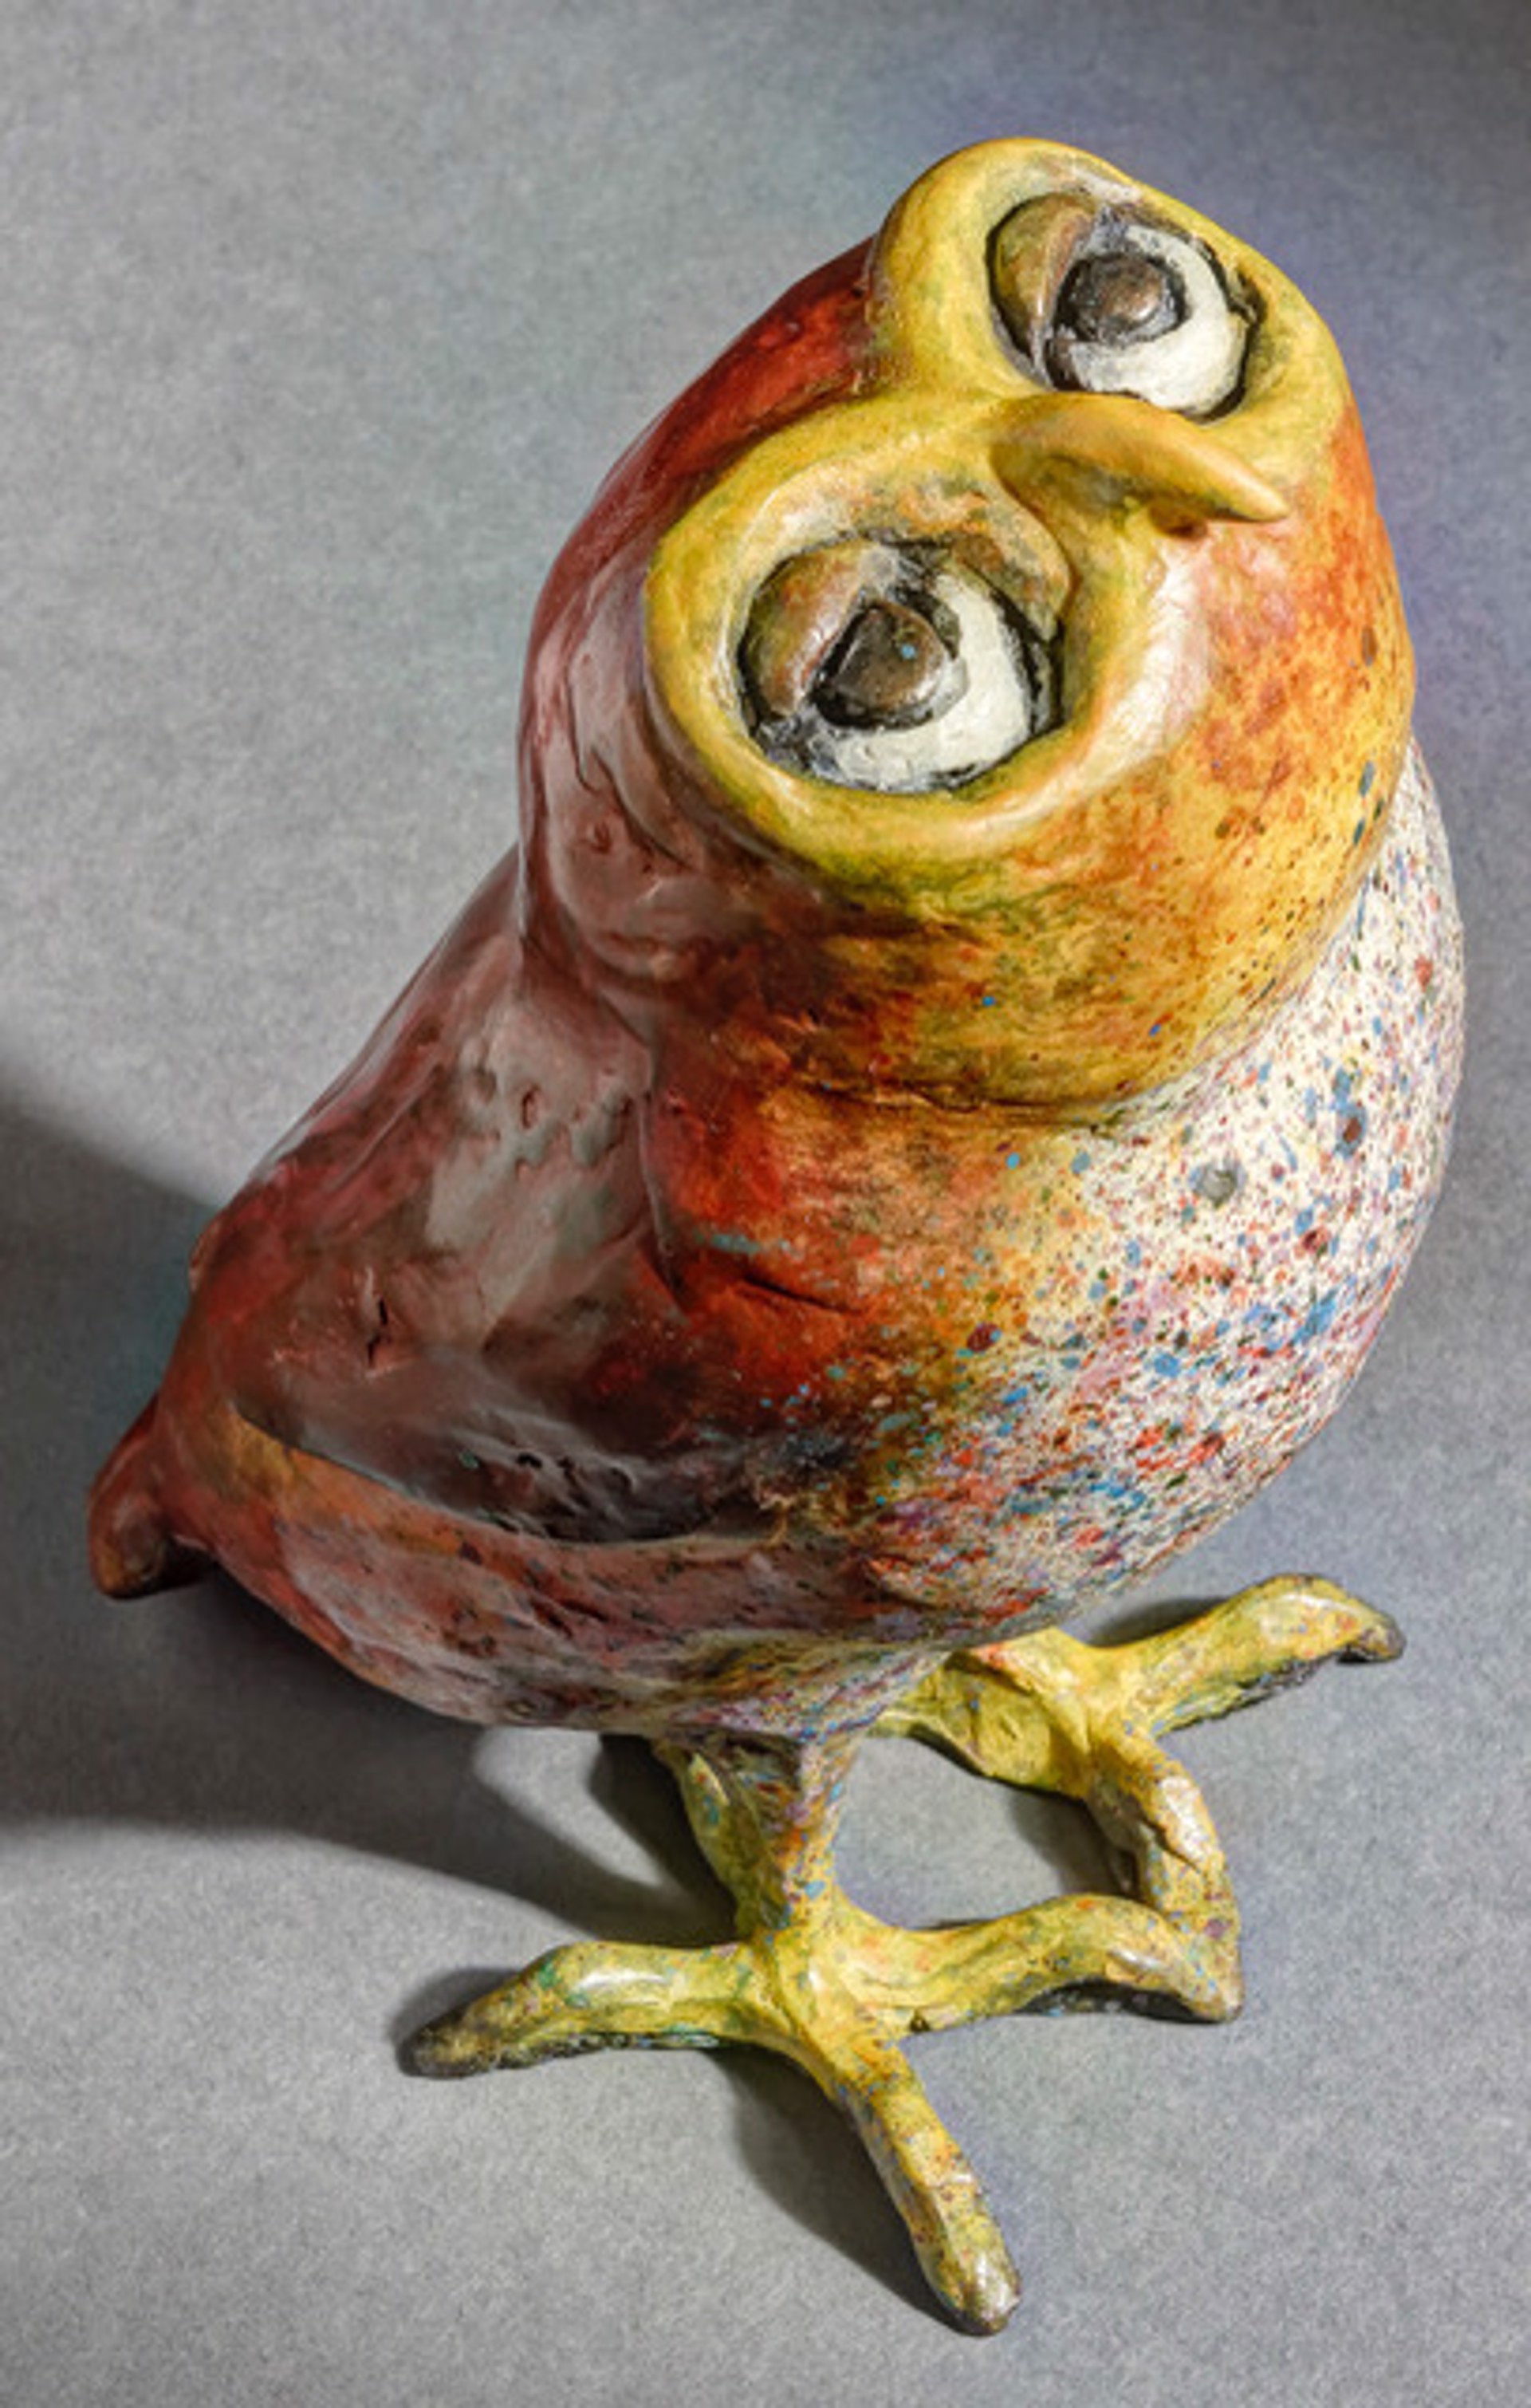 Stargazer ~ Featuring a little burrowing owl wondering at the big sky, artist Barbara Meikle celebrates all creatures big and small. A limited-edition of 30, each bronze has a custom color patina finished by Barbara. by Barbara Meikle